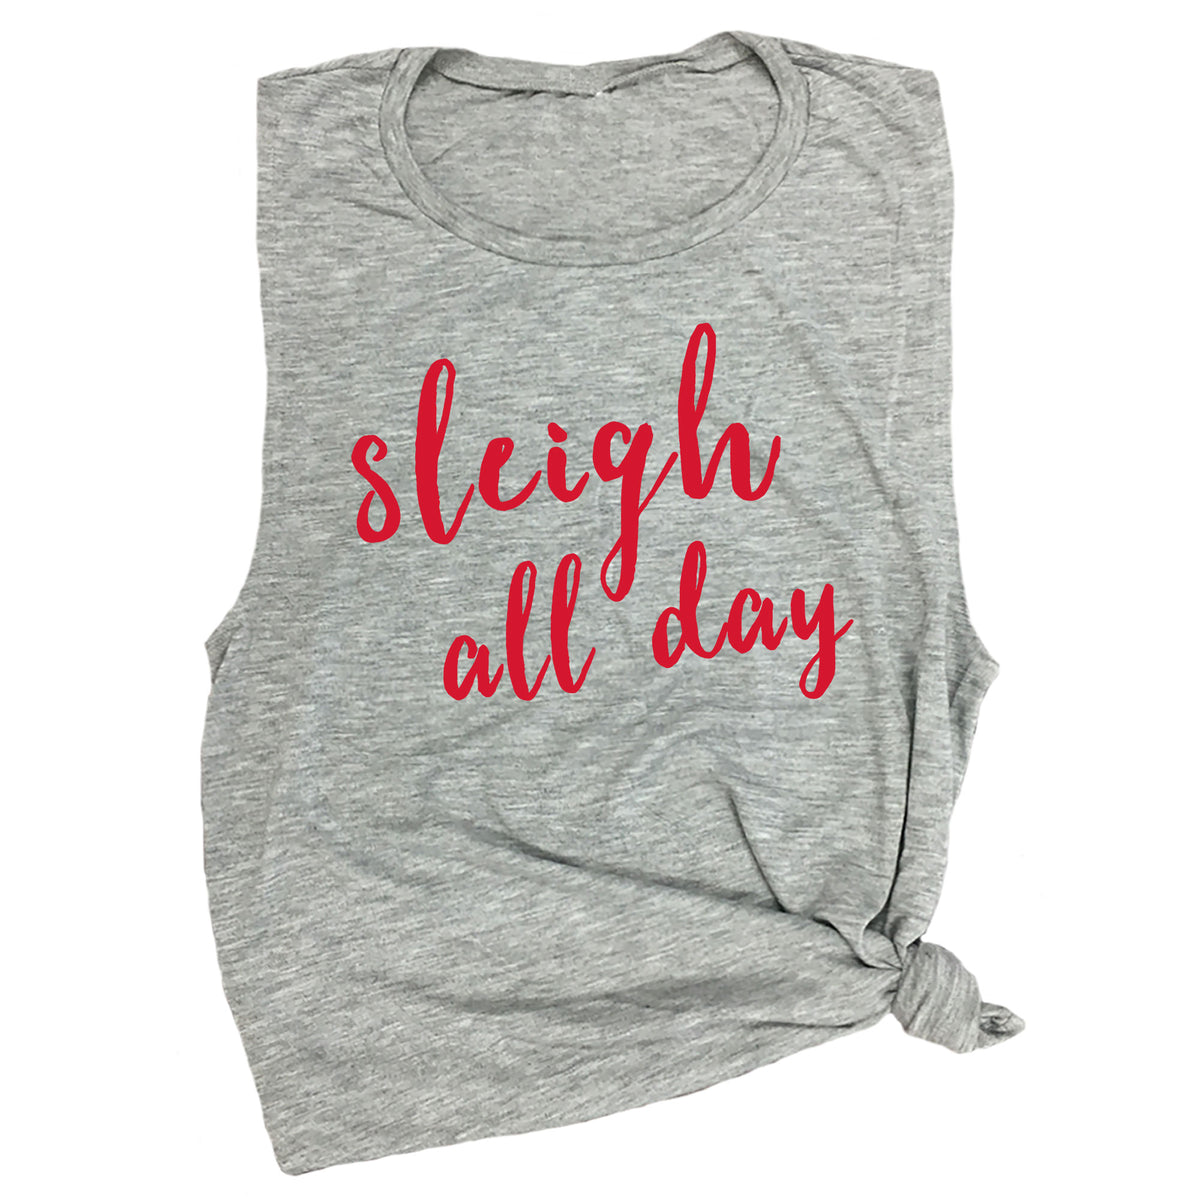 Sleigh All Day Muscle Tee